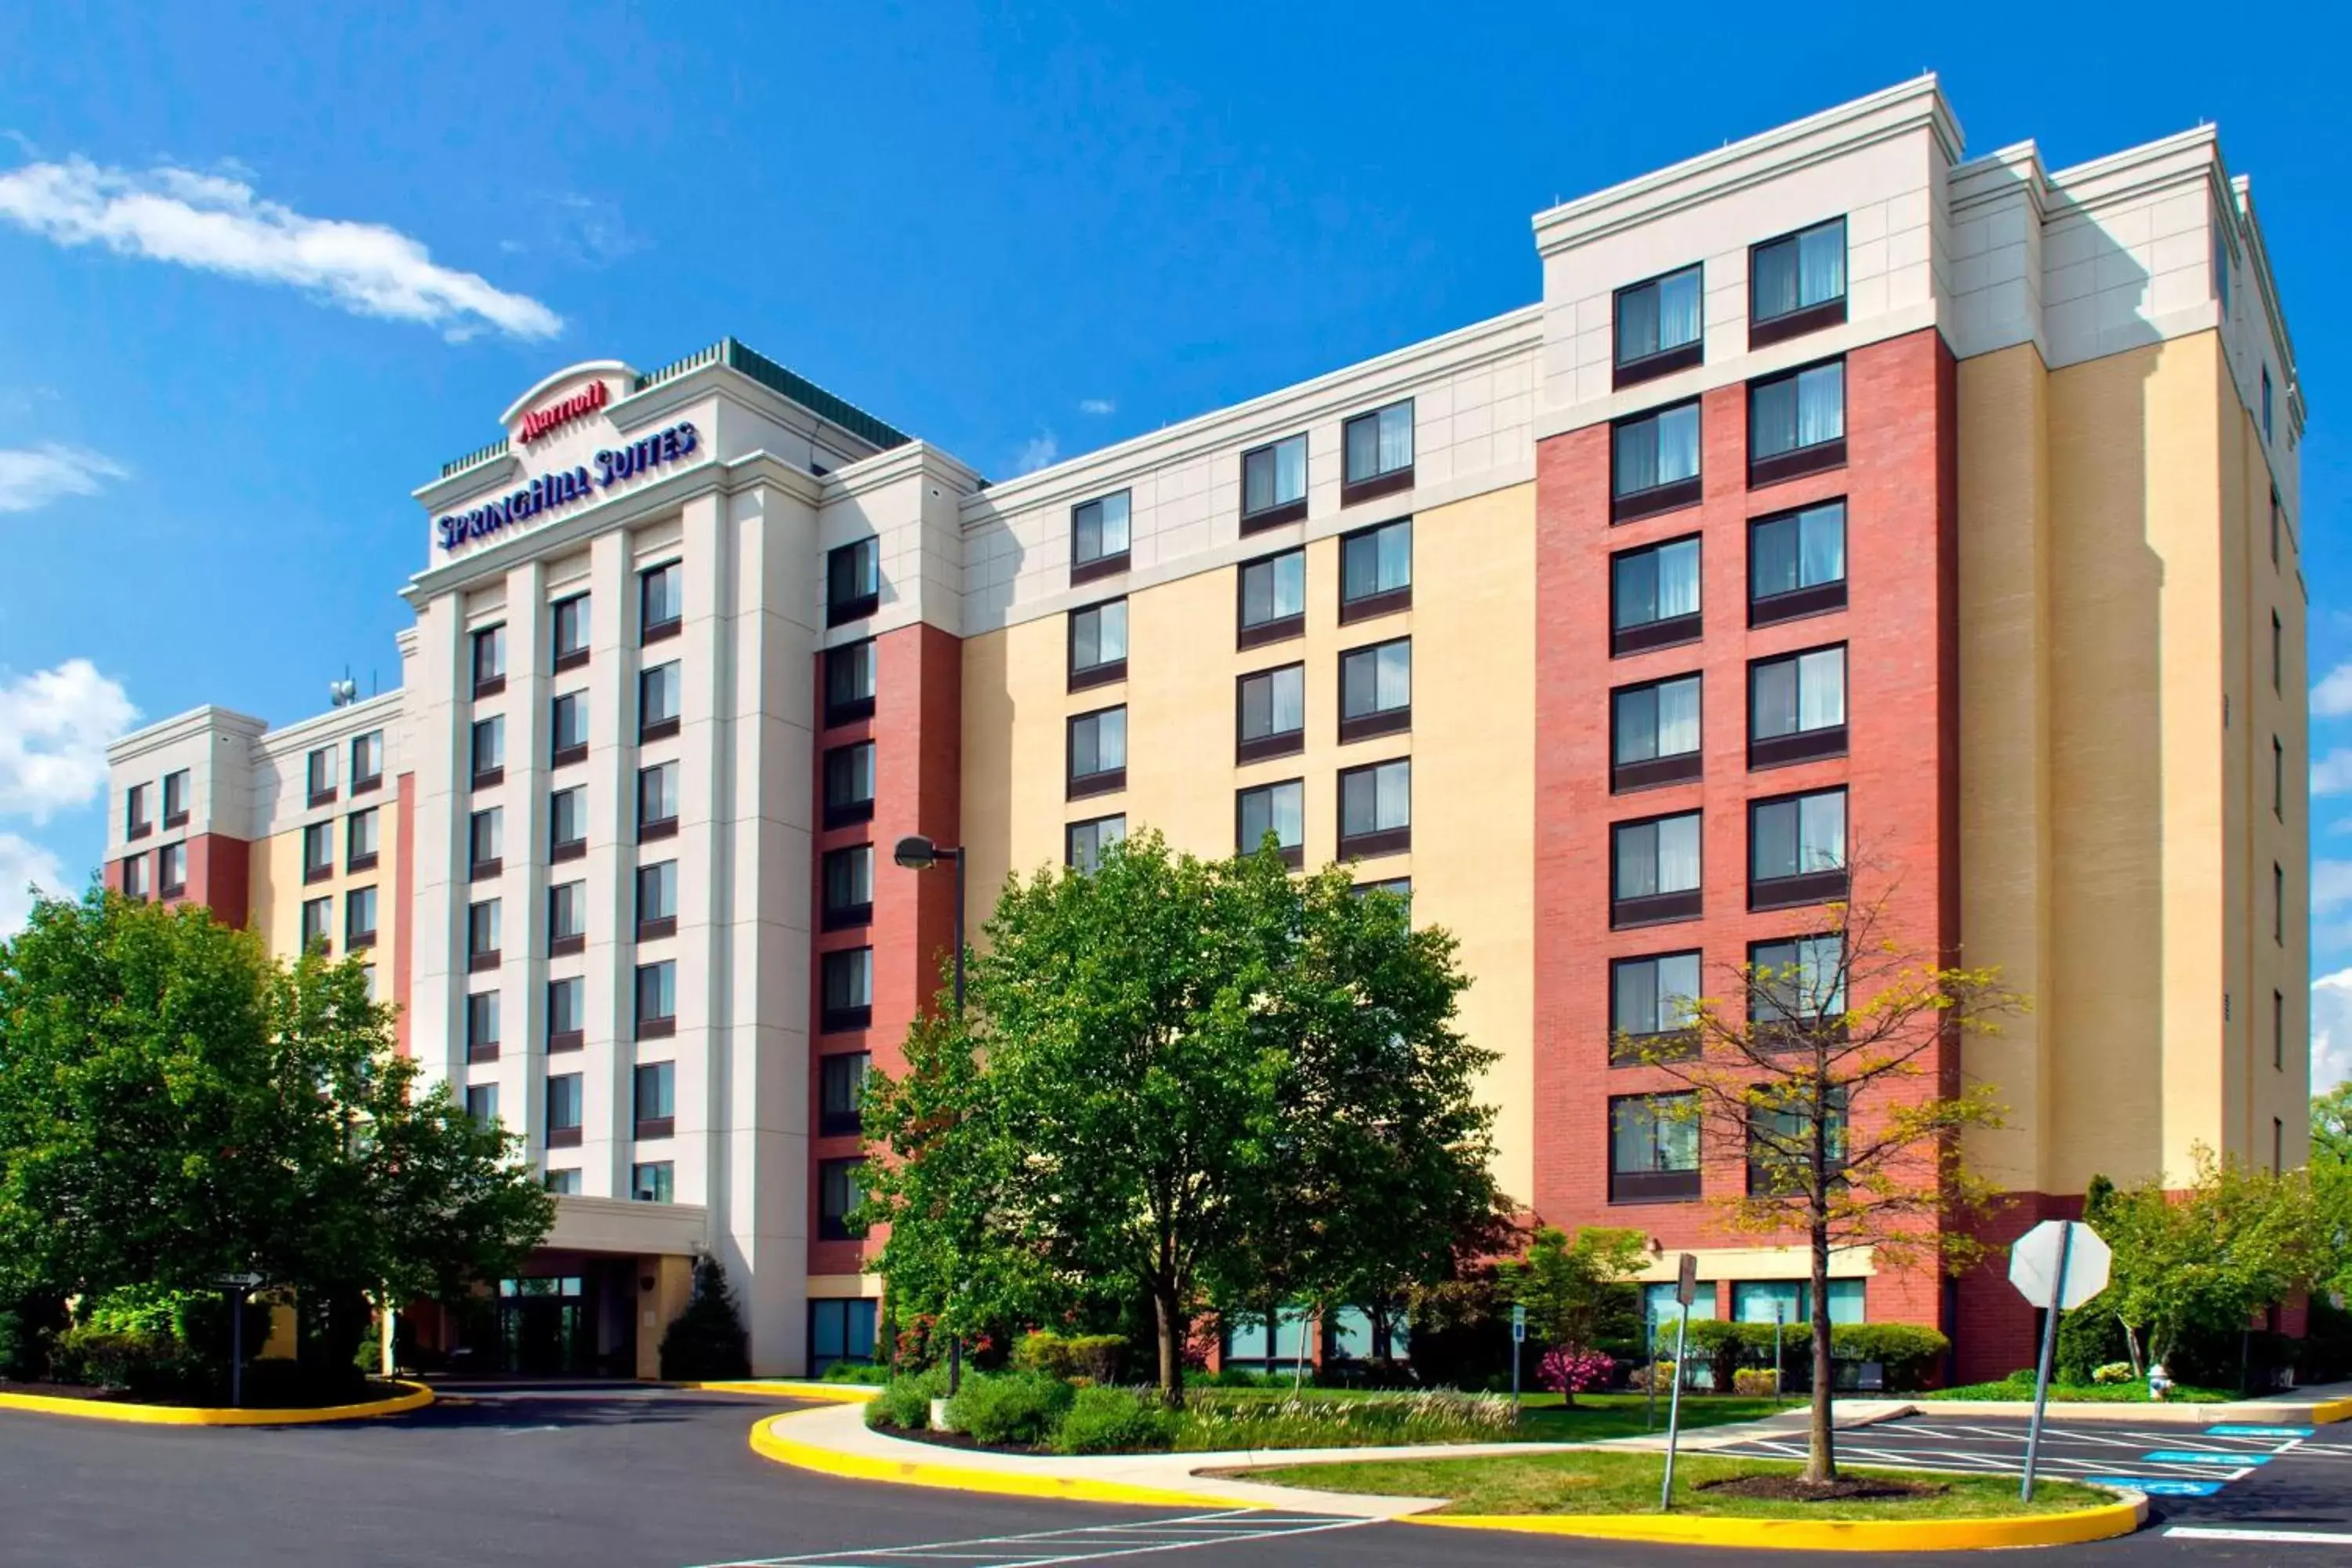 Property Building in SpringHill Suites Philadelphia Plymouth Meeting